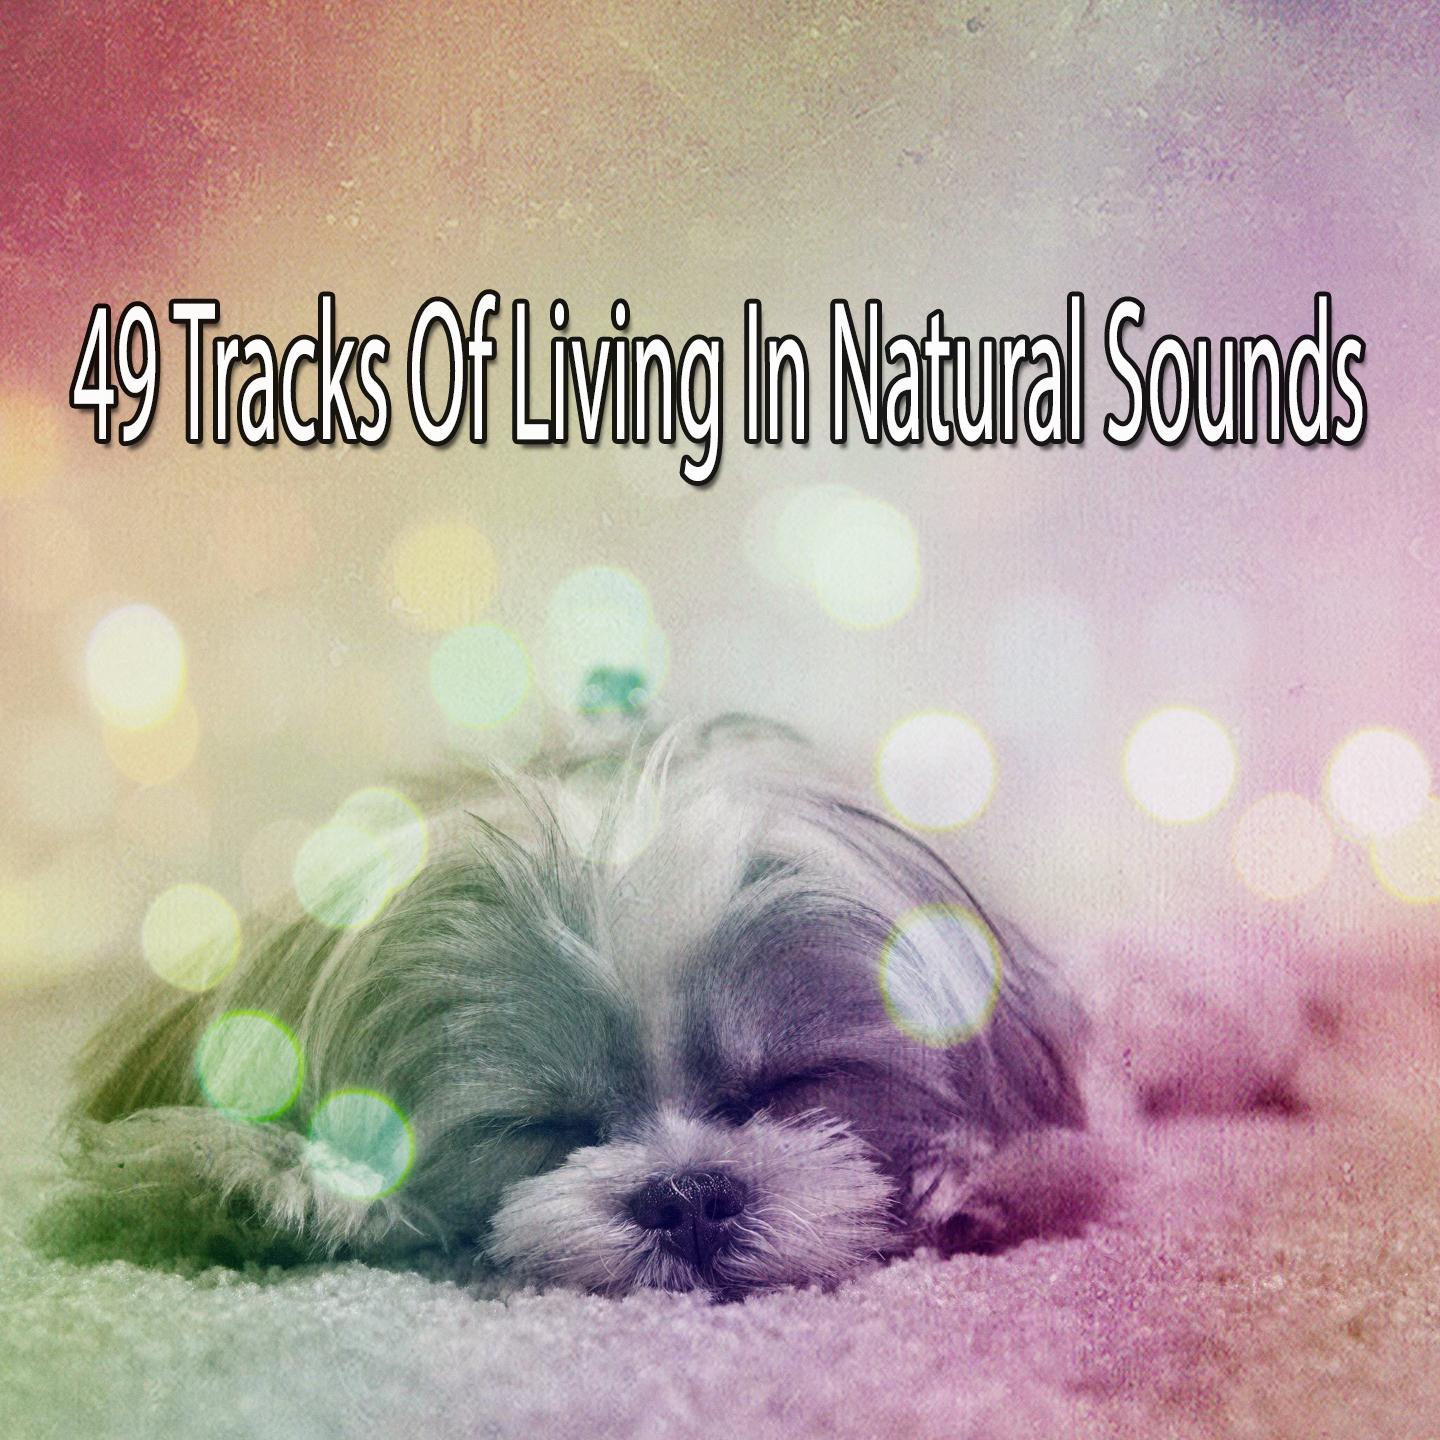 49 Tracks Of Living In Natural Sounds